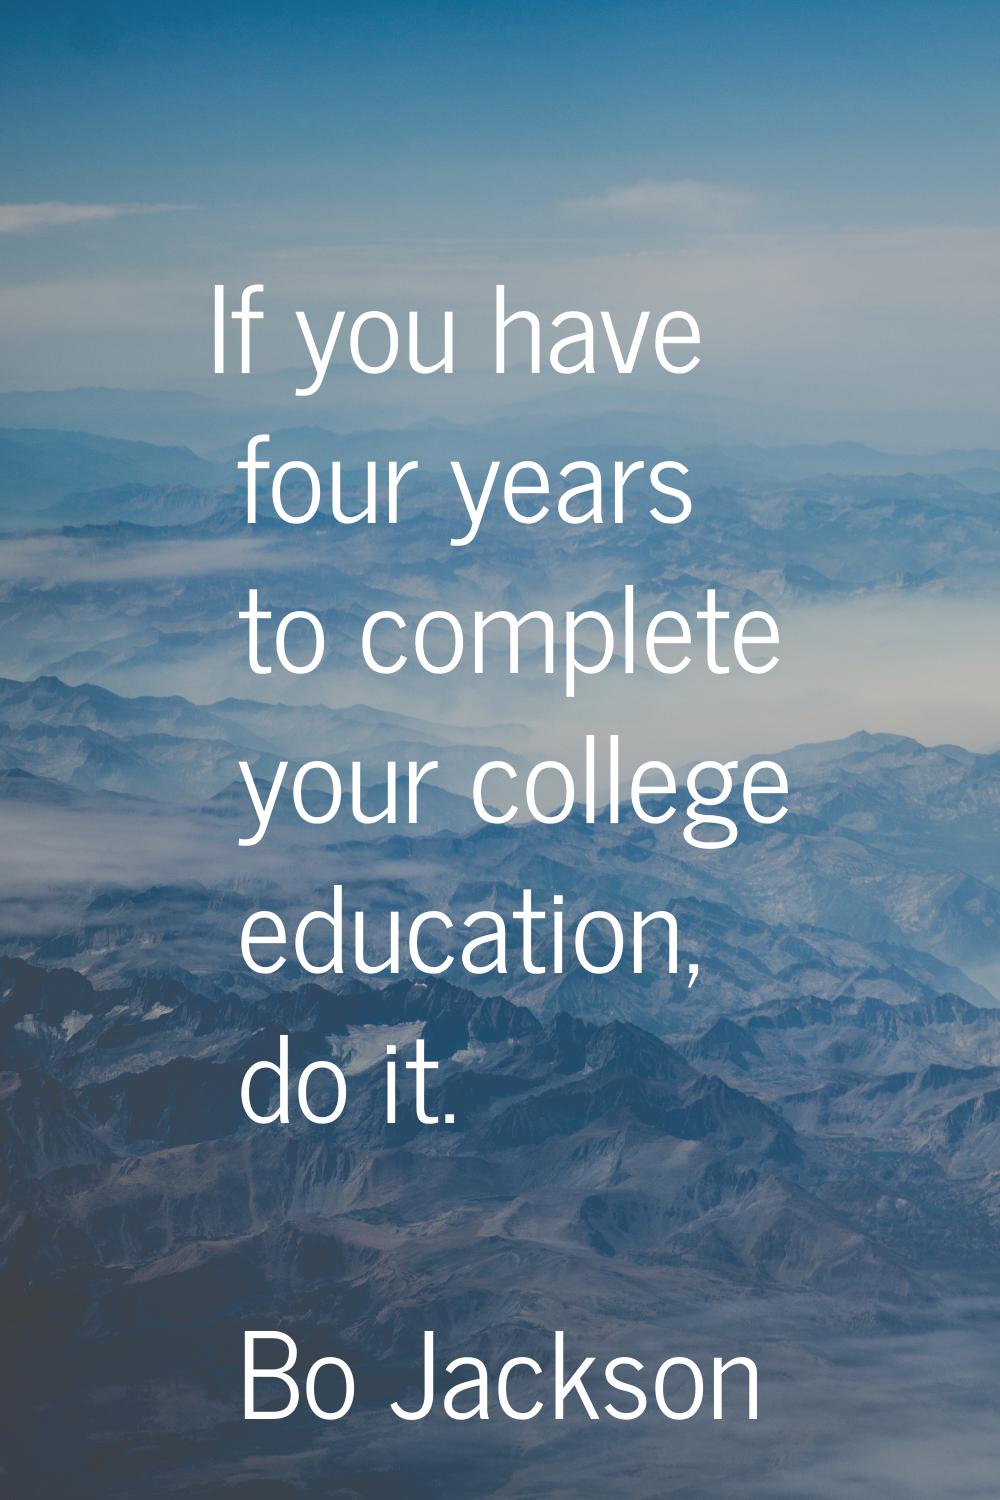 If you have four years to complete your college education, do it.